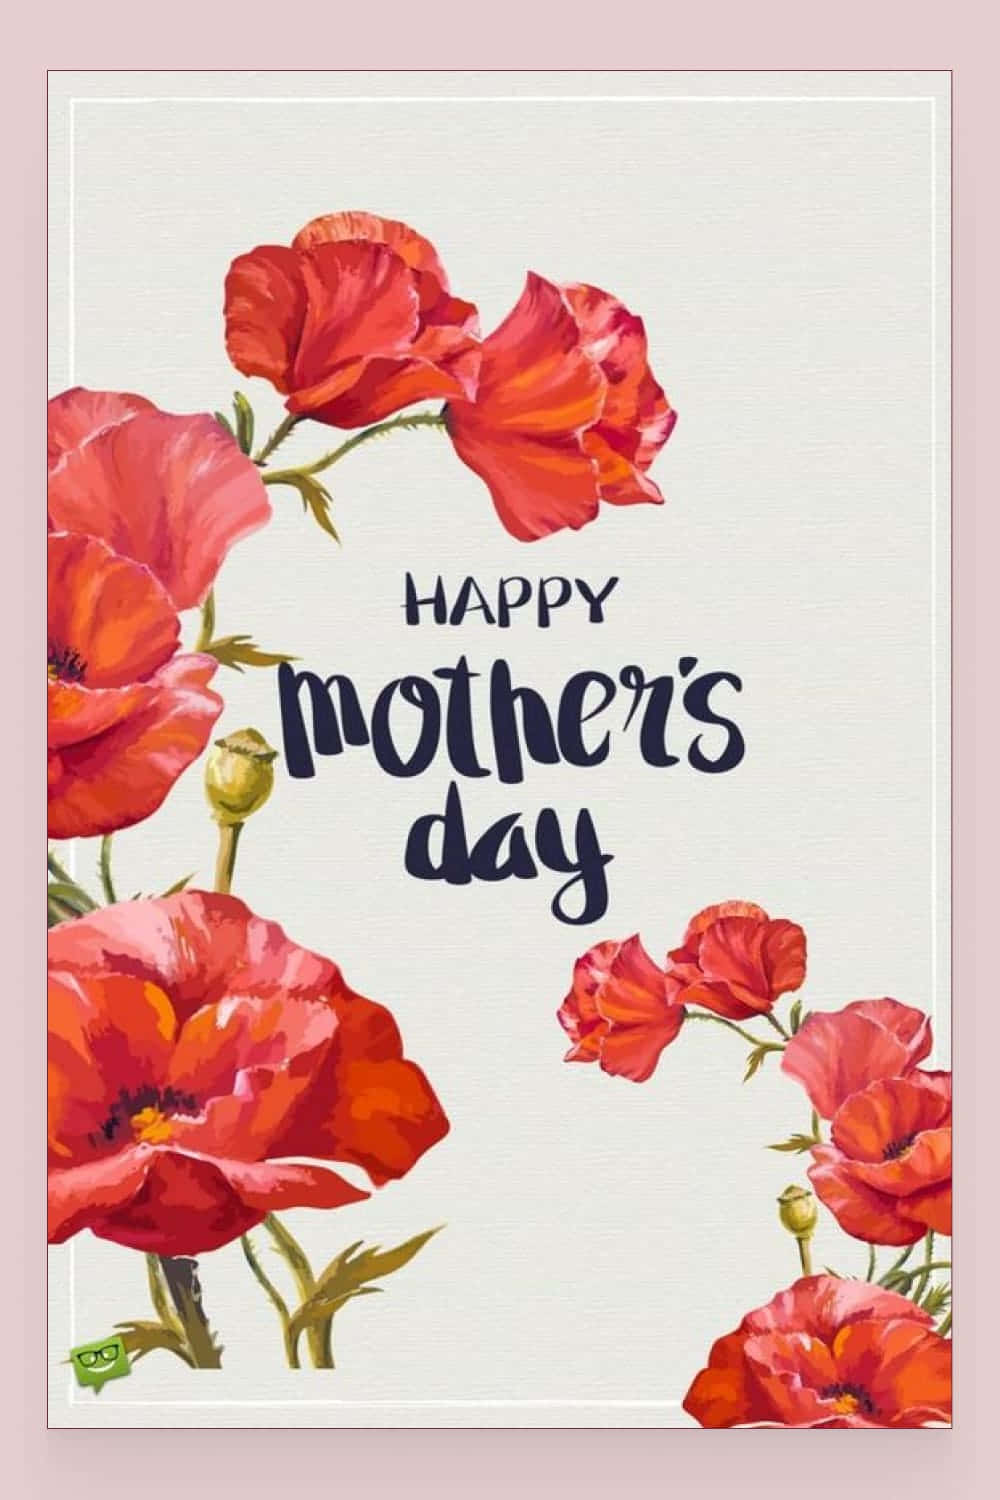 "celebrating Love And Warmth: A Delightful Mother's Day Background"